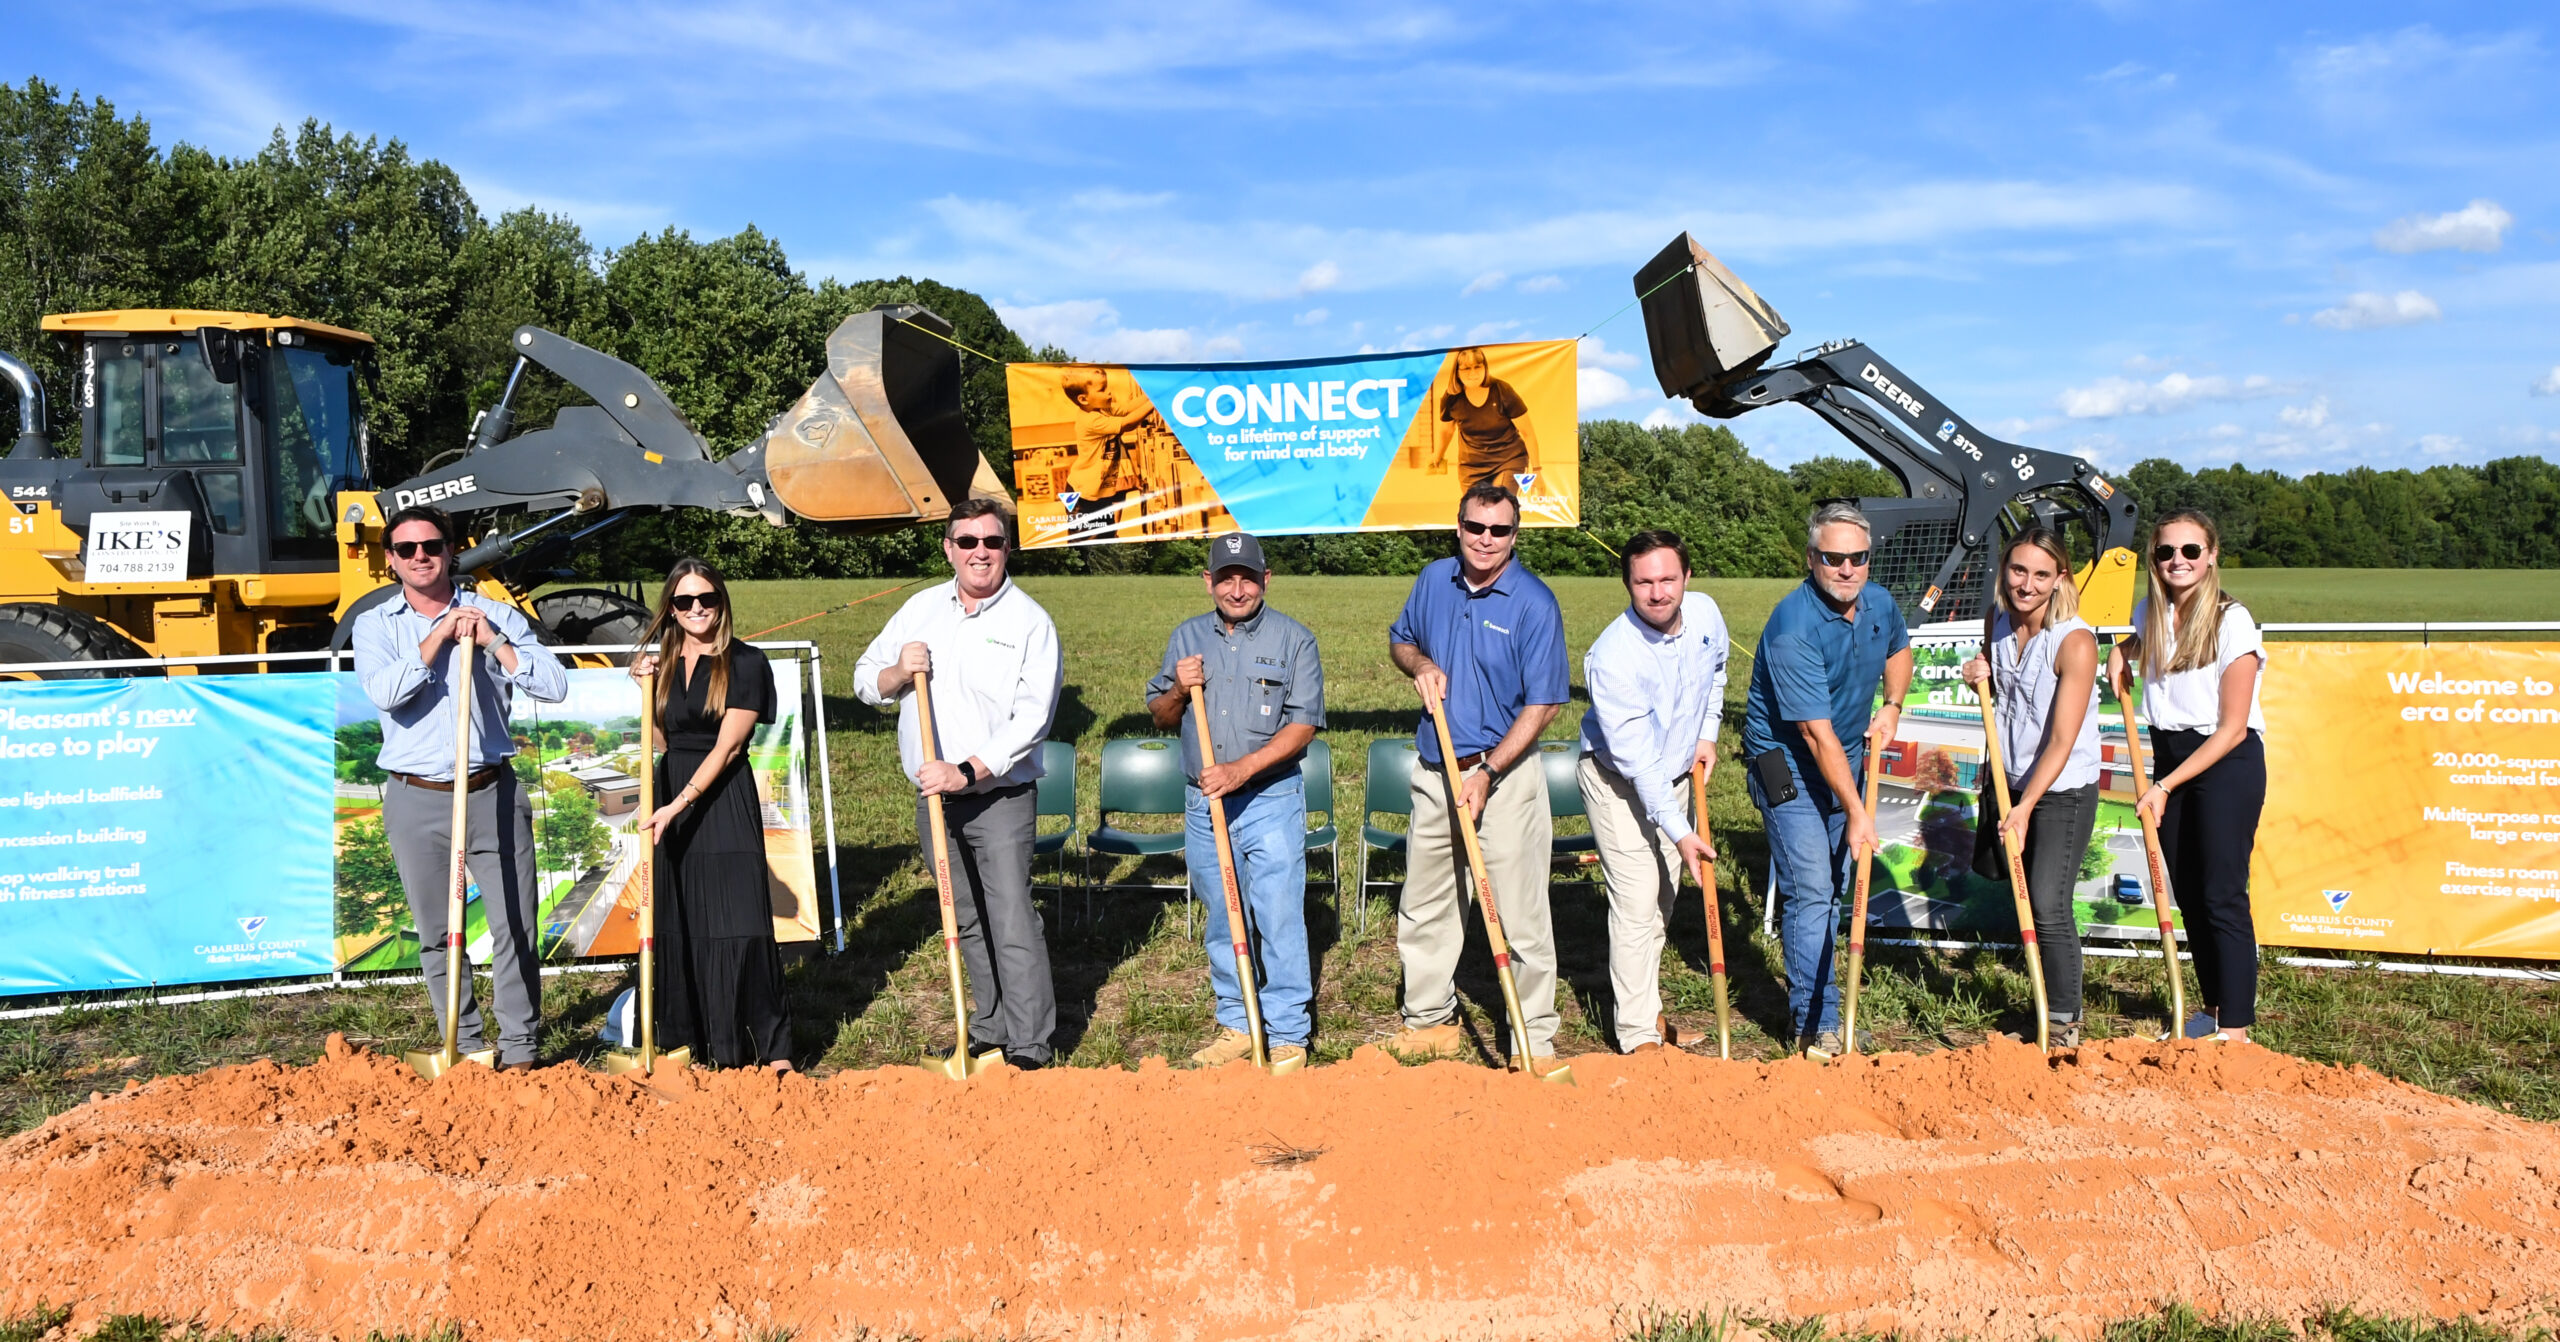 Image shows a group of people holding shovels and digging into the dirt. Behind them are two construction vehicles with their buckets up. The sky is blue in the background.